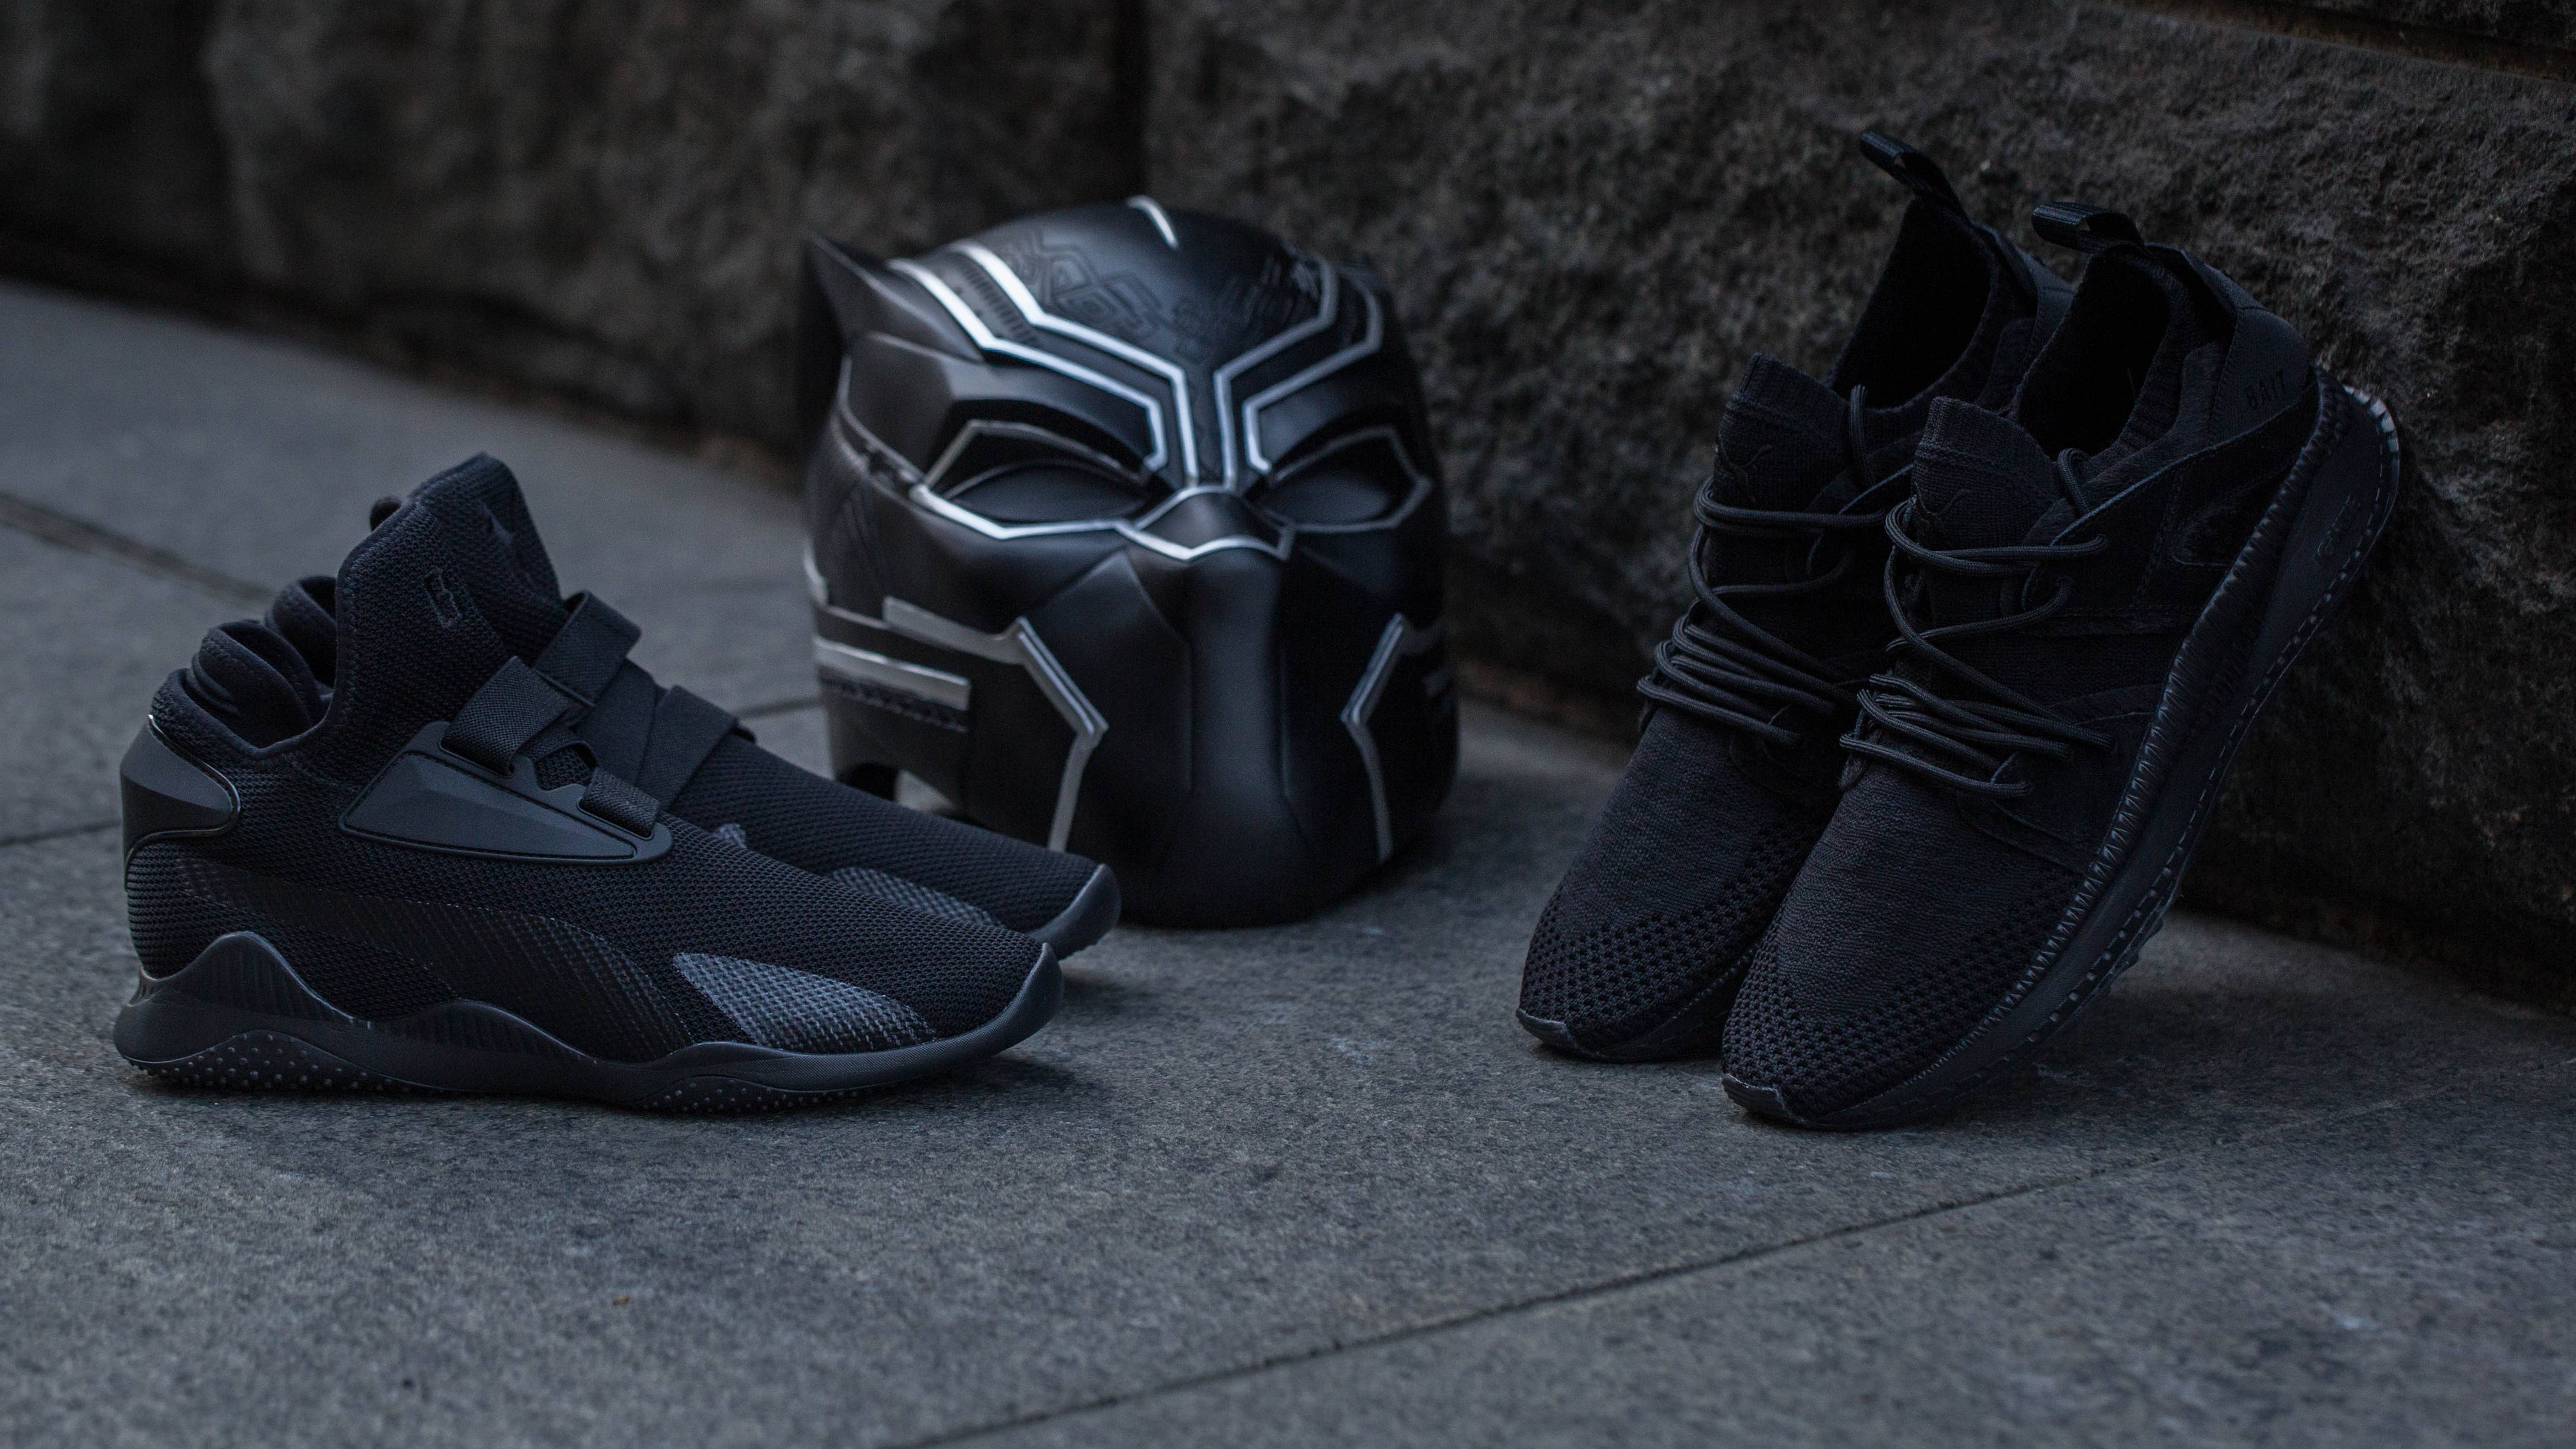 puma bait black panther collection